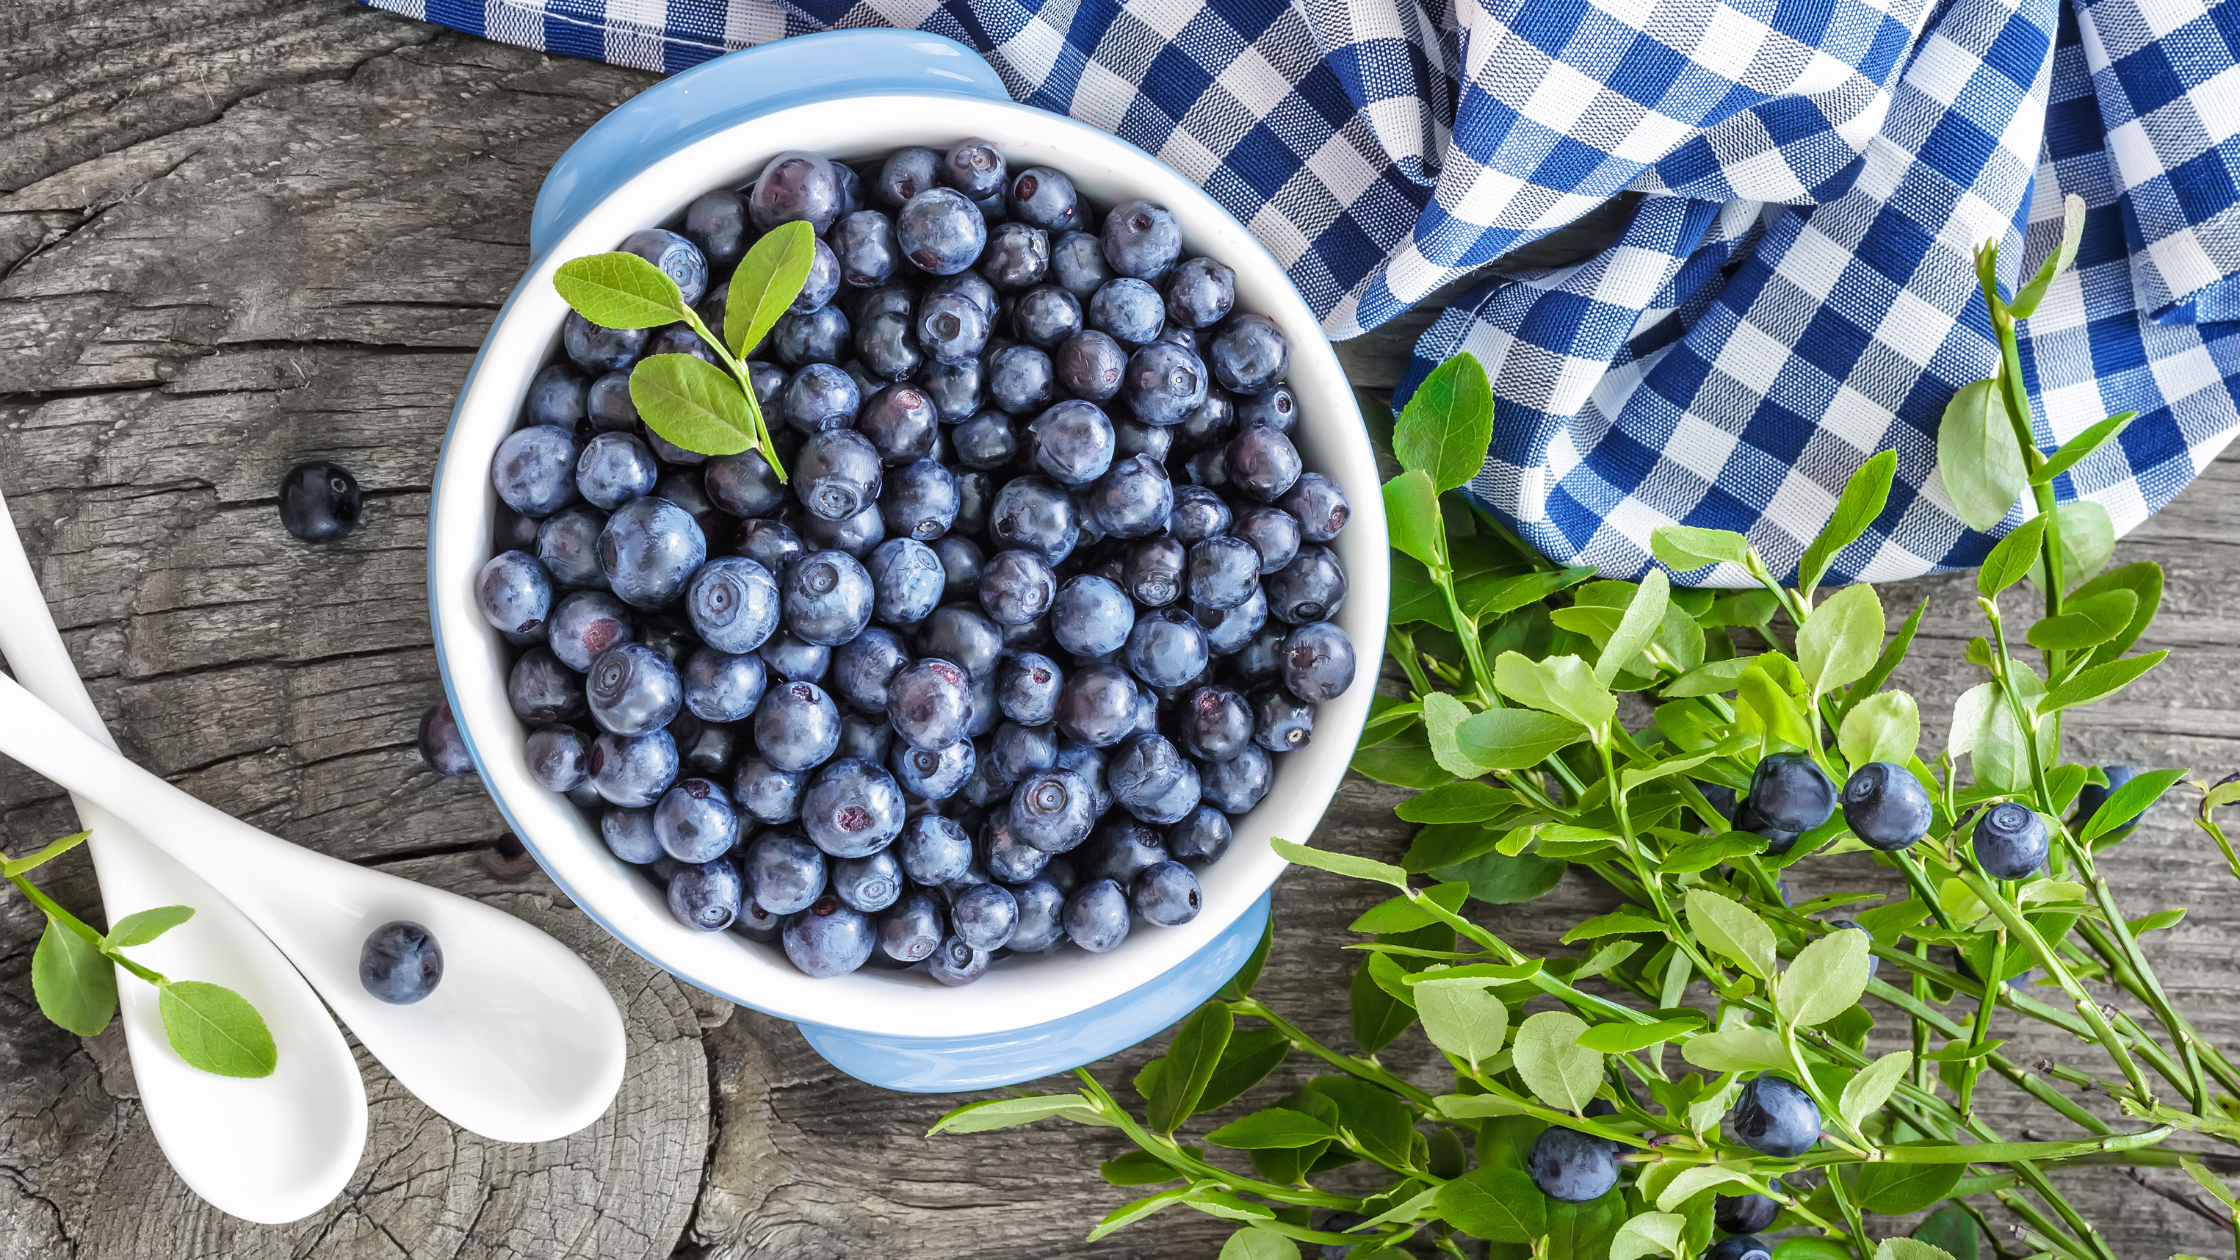 Can Blueberries Help Manage Your Blood Sugar?